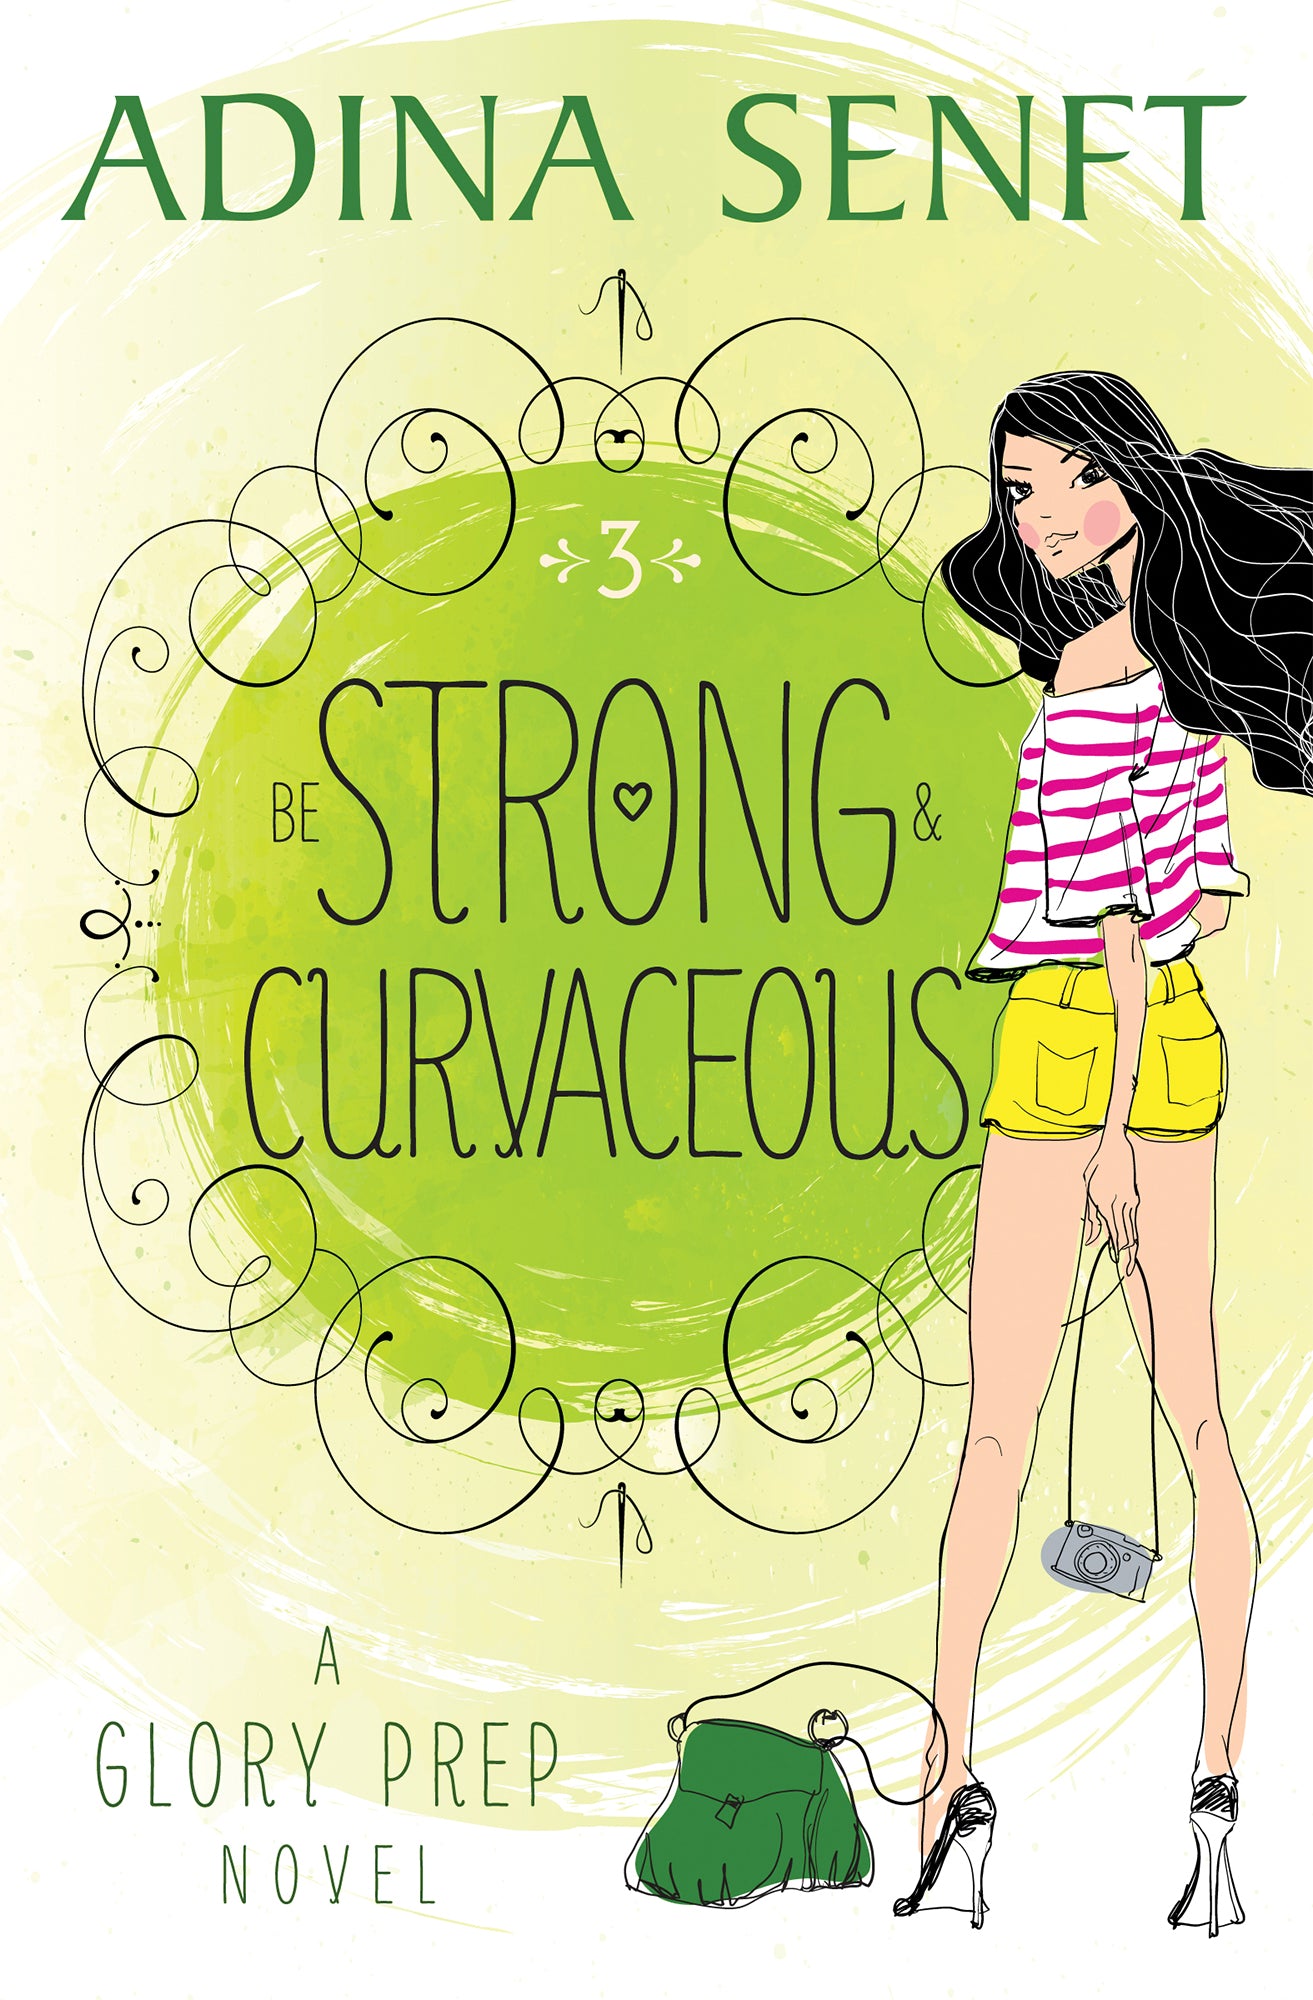 Be Strong and Curvaceous by Adina Senft